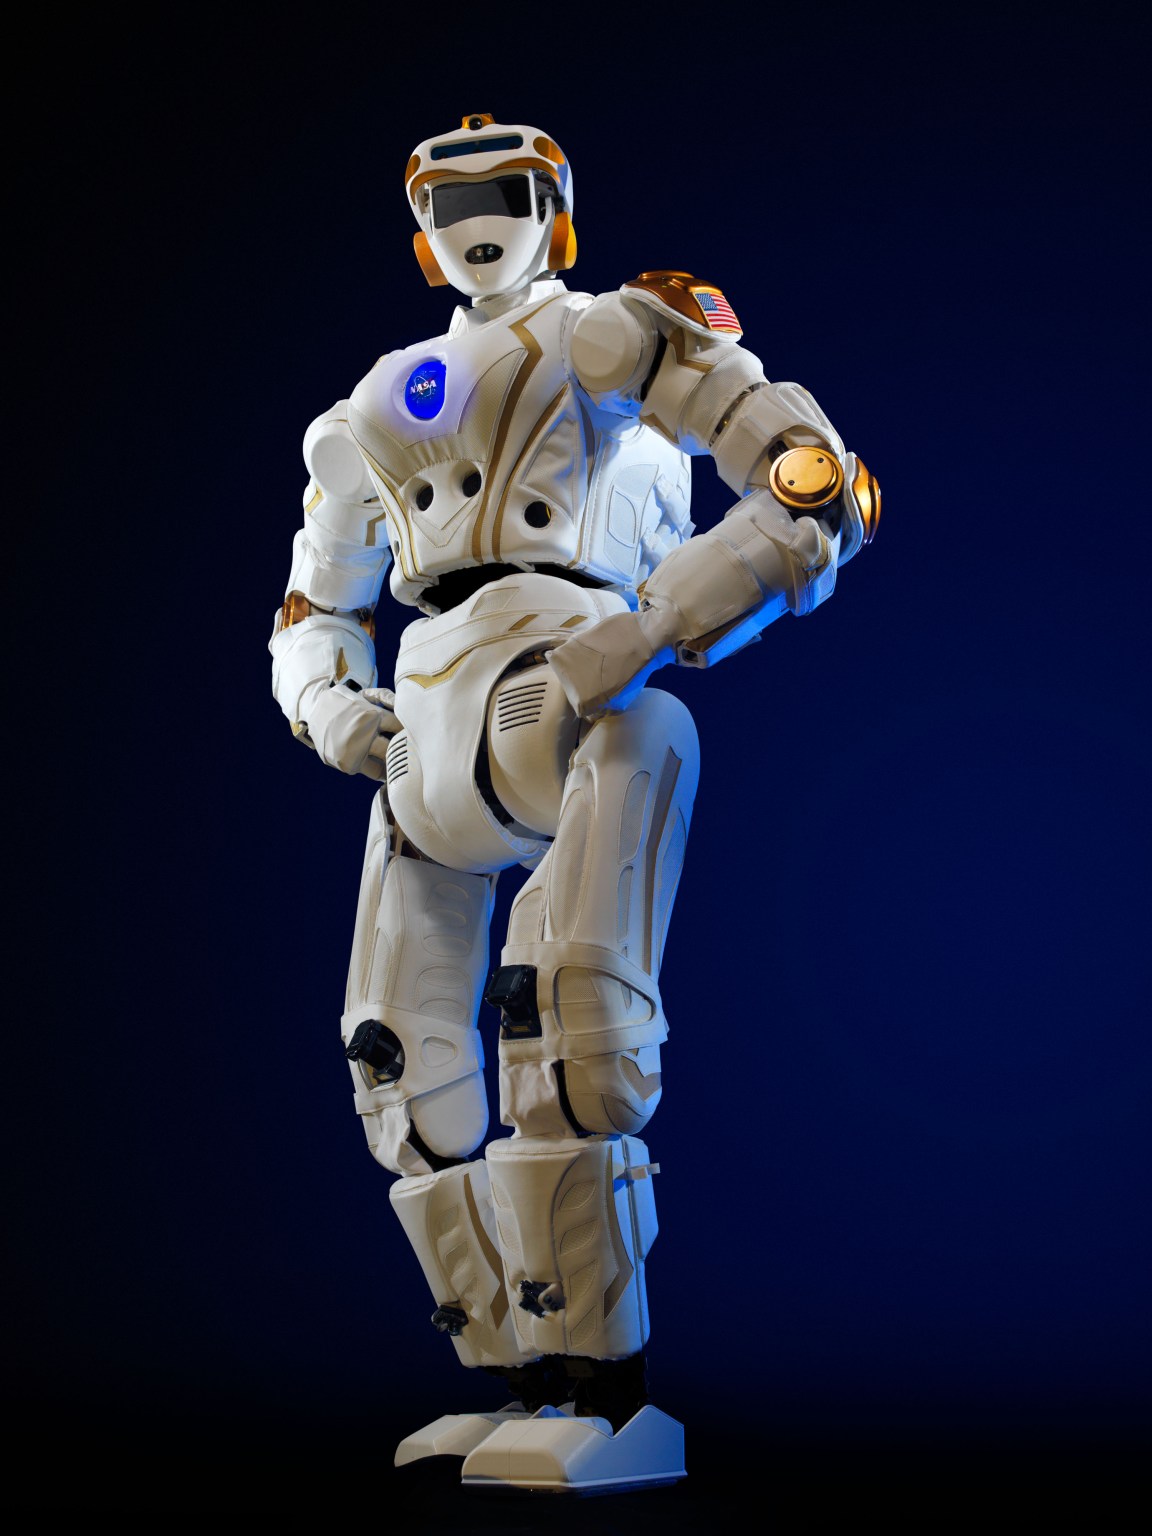 Valkyrie, a name taken from Norse mythology, is designed to be a robust, rugged, entirely electric humanoid robot capable of operating in degraded or damaged human-engineered environments.